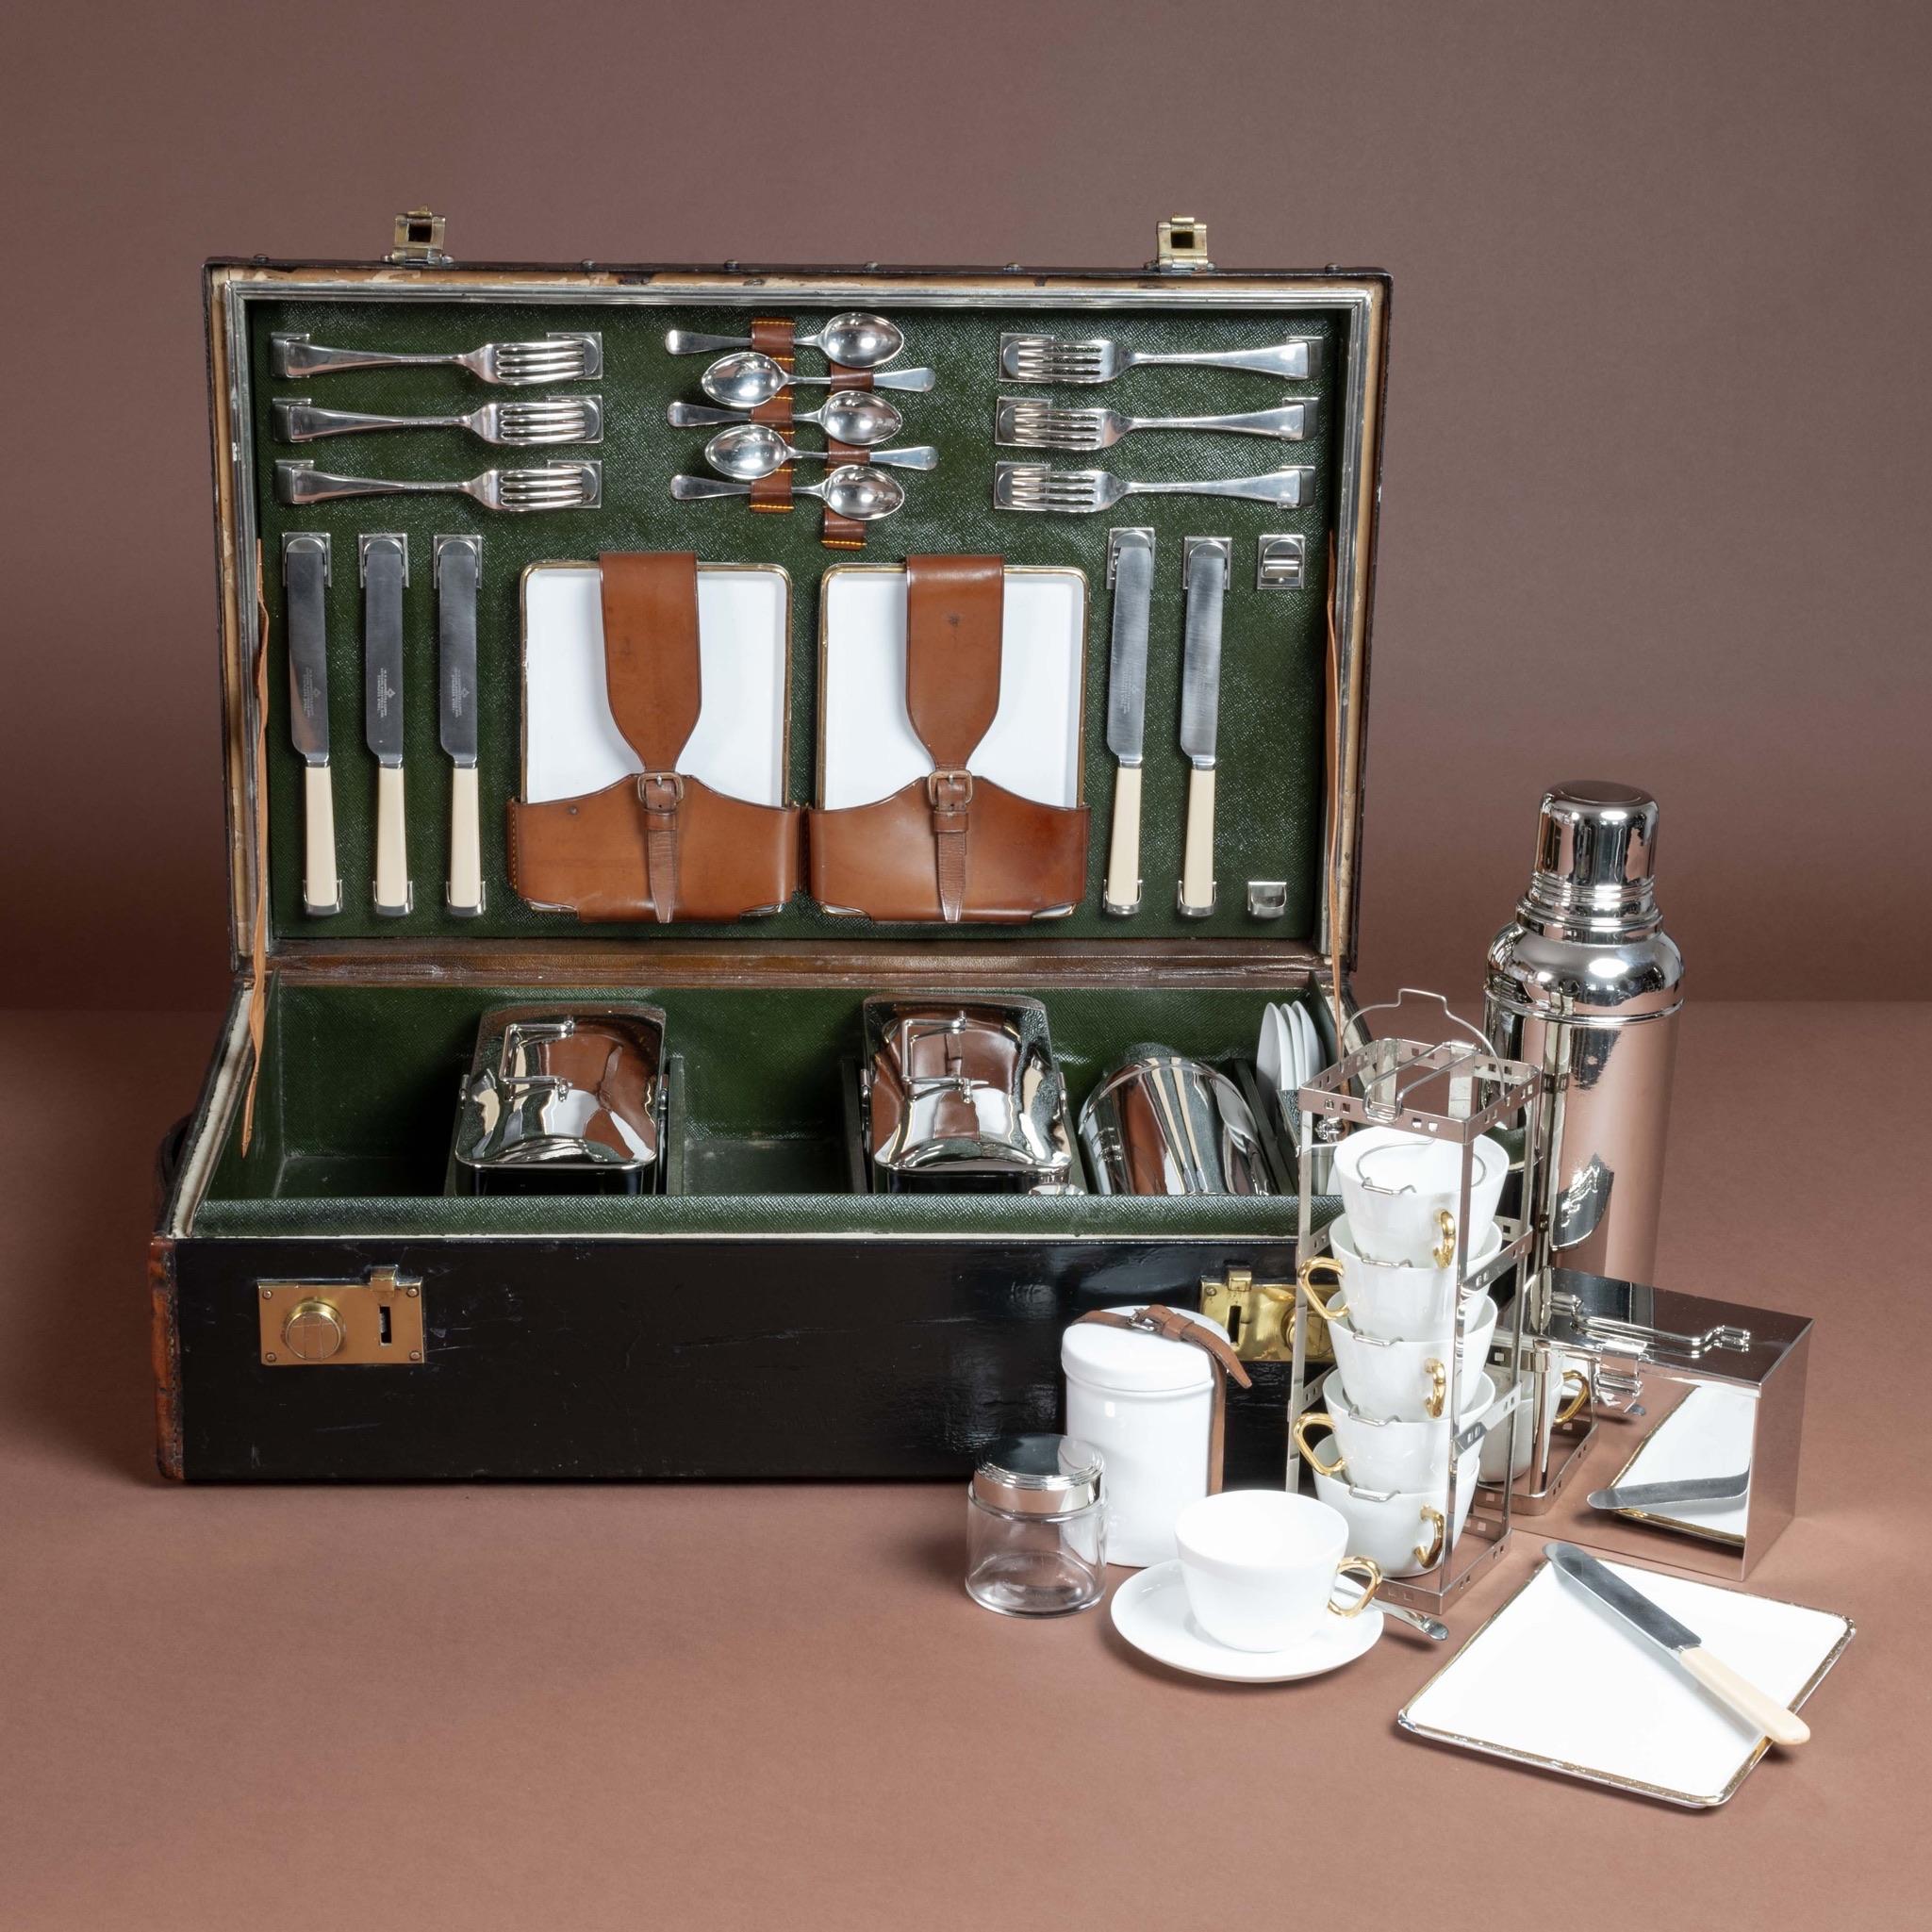 Impressive six person motoring picnic case; circa 1910. The collection comprises six enamelled tin plates, six ceramic cups with matching saucers and enough cutlery for six individuals.

Additionally, it contains two enamelled tin food containers